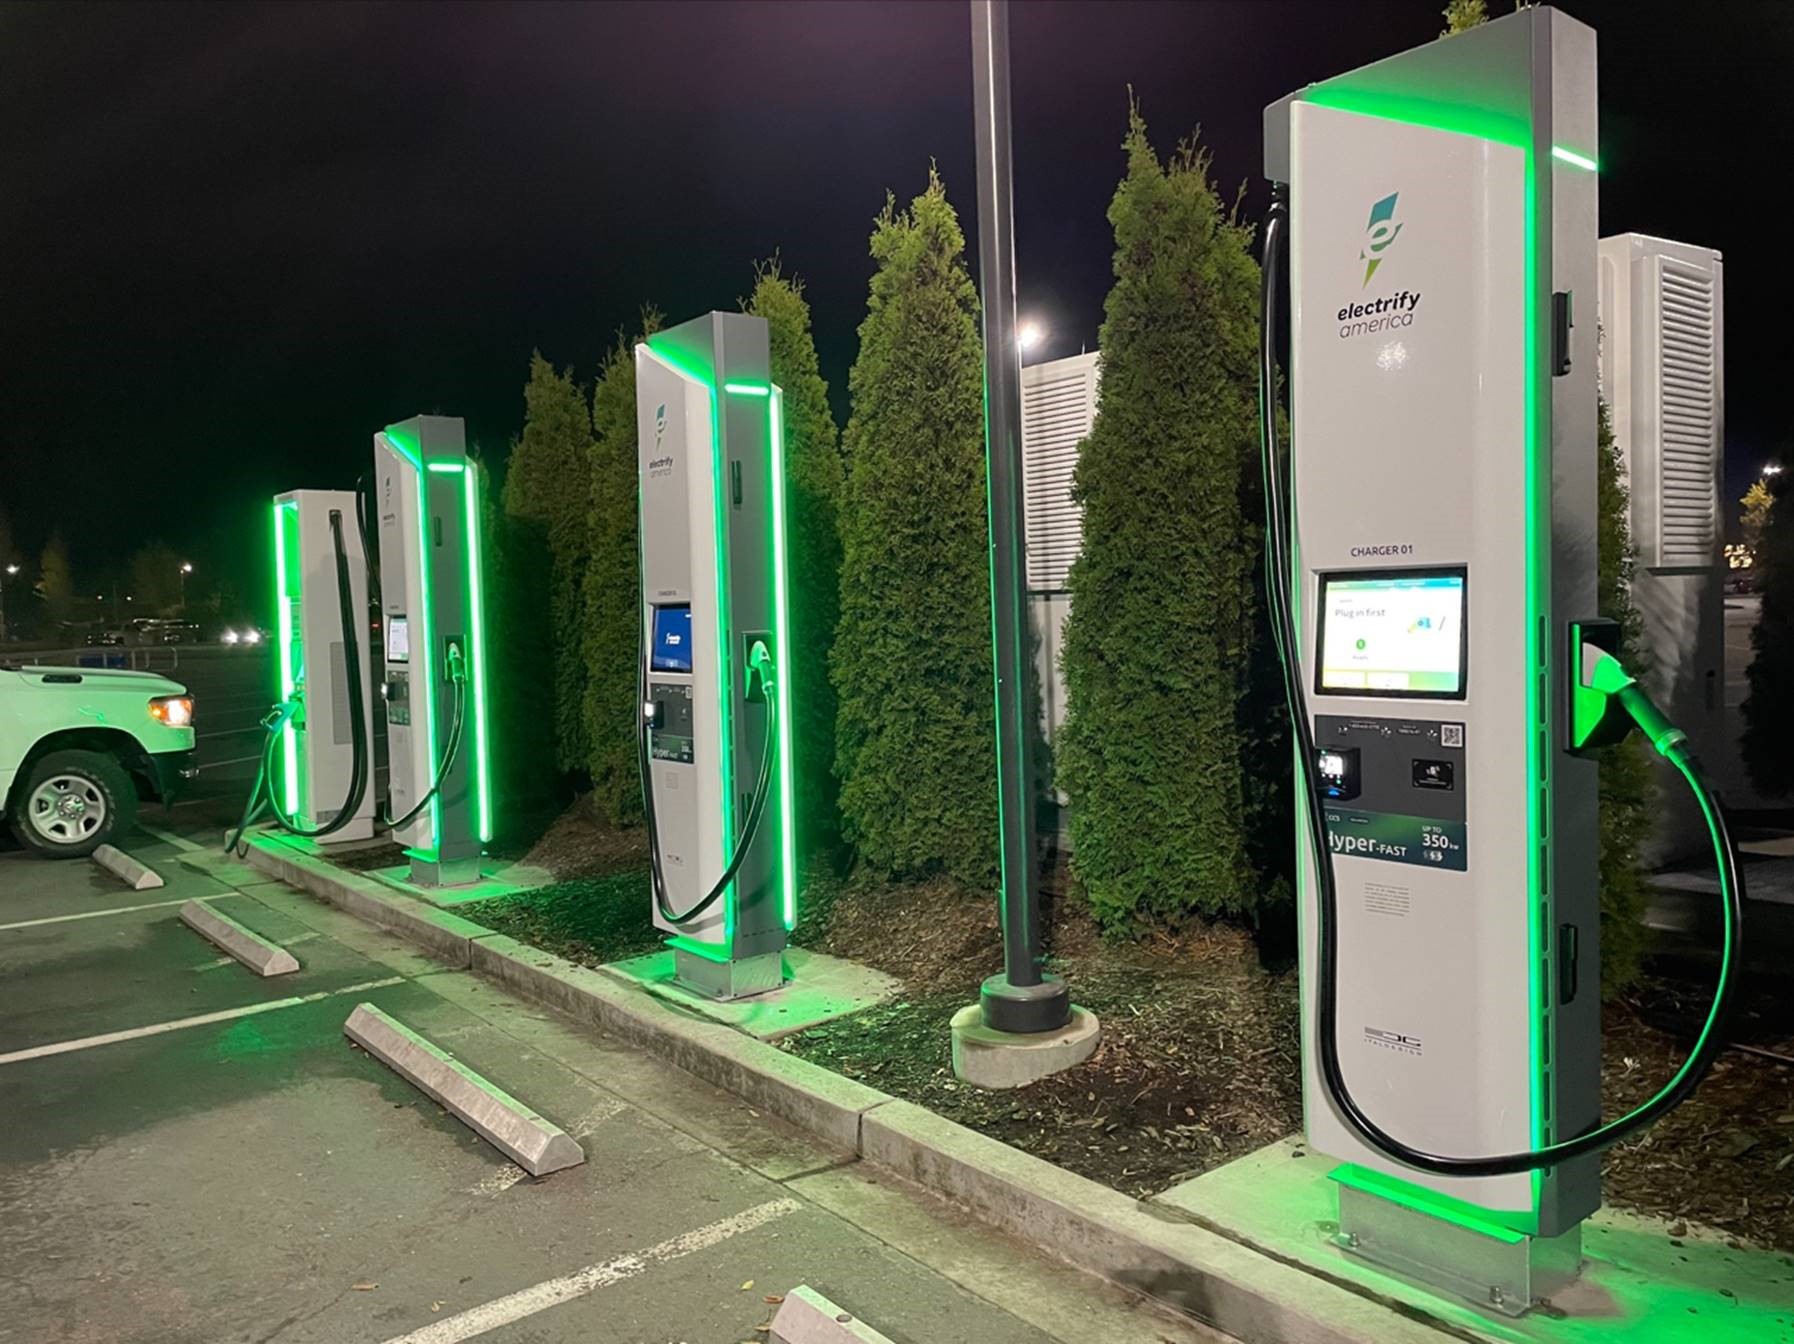 electrify-america-says-these-charging-station-locations-have-been